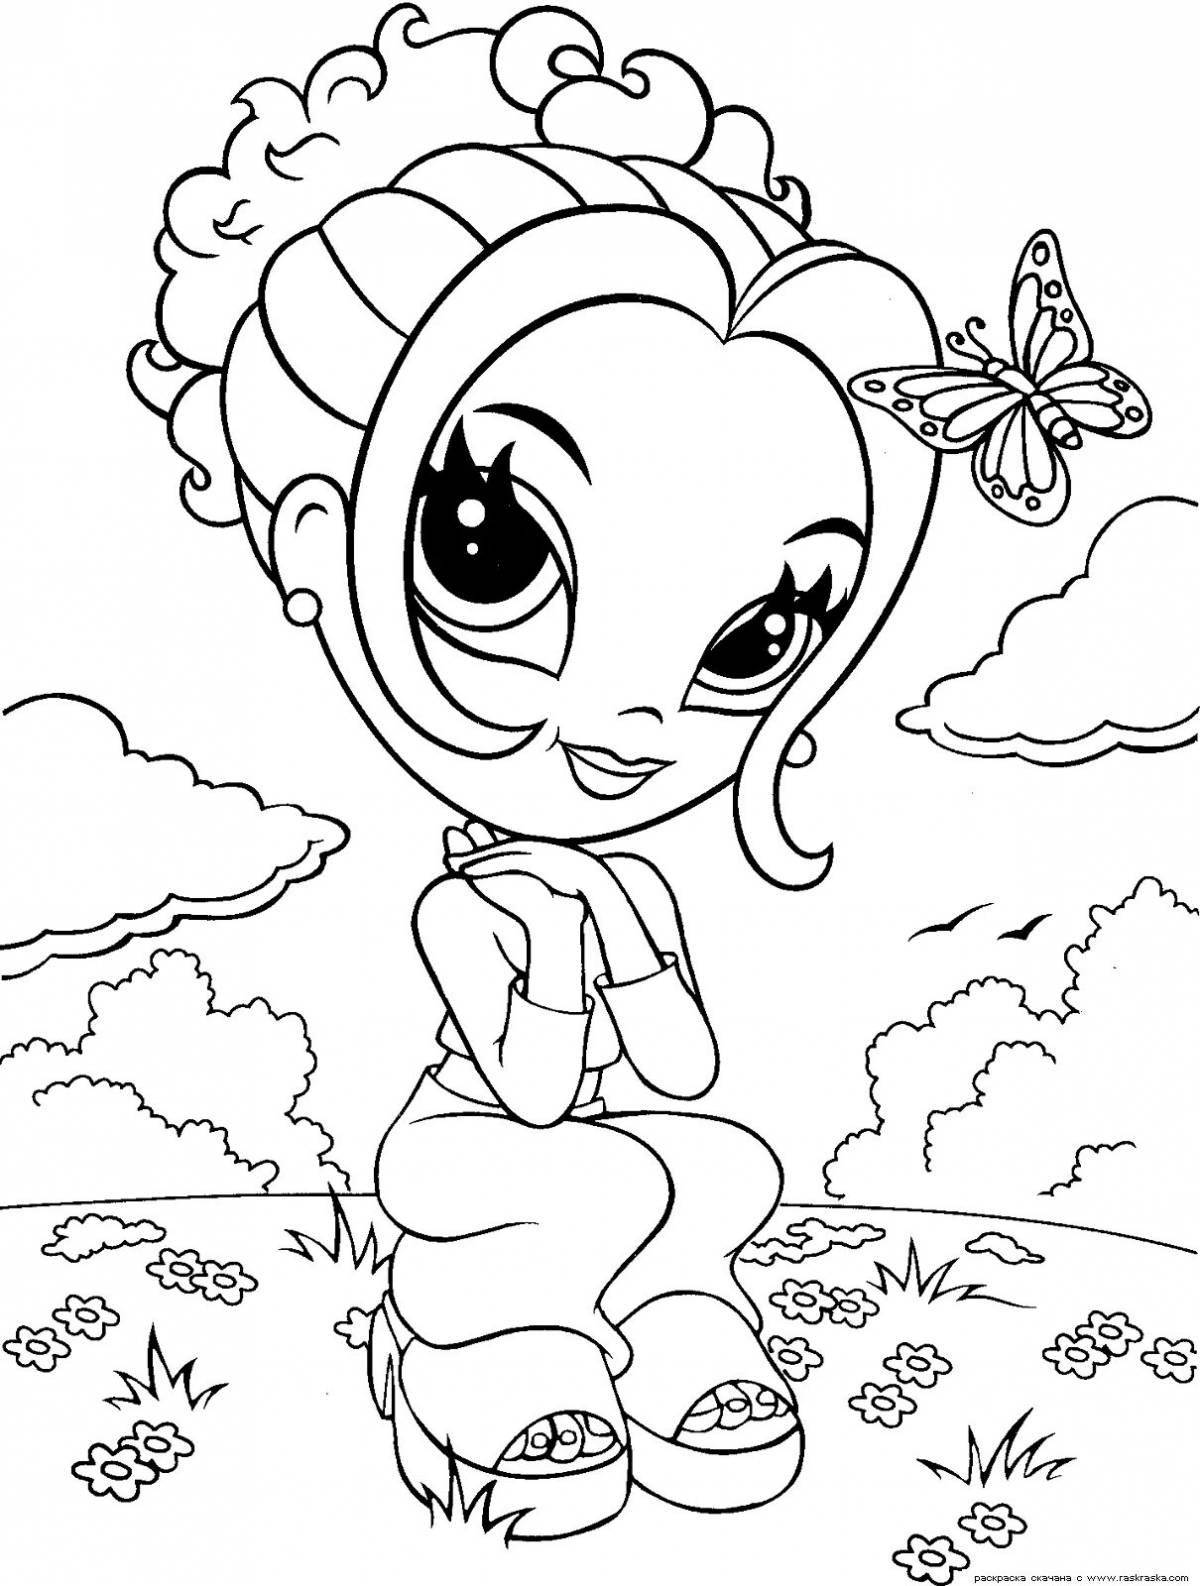 Creative coloring book interesting for 8 year old girls